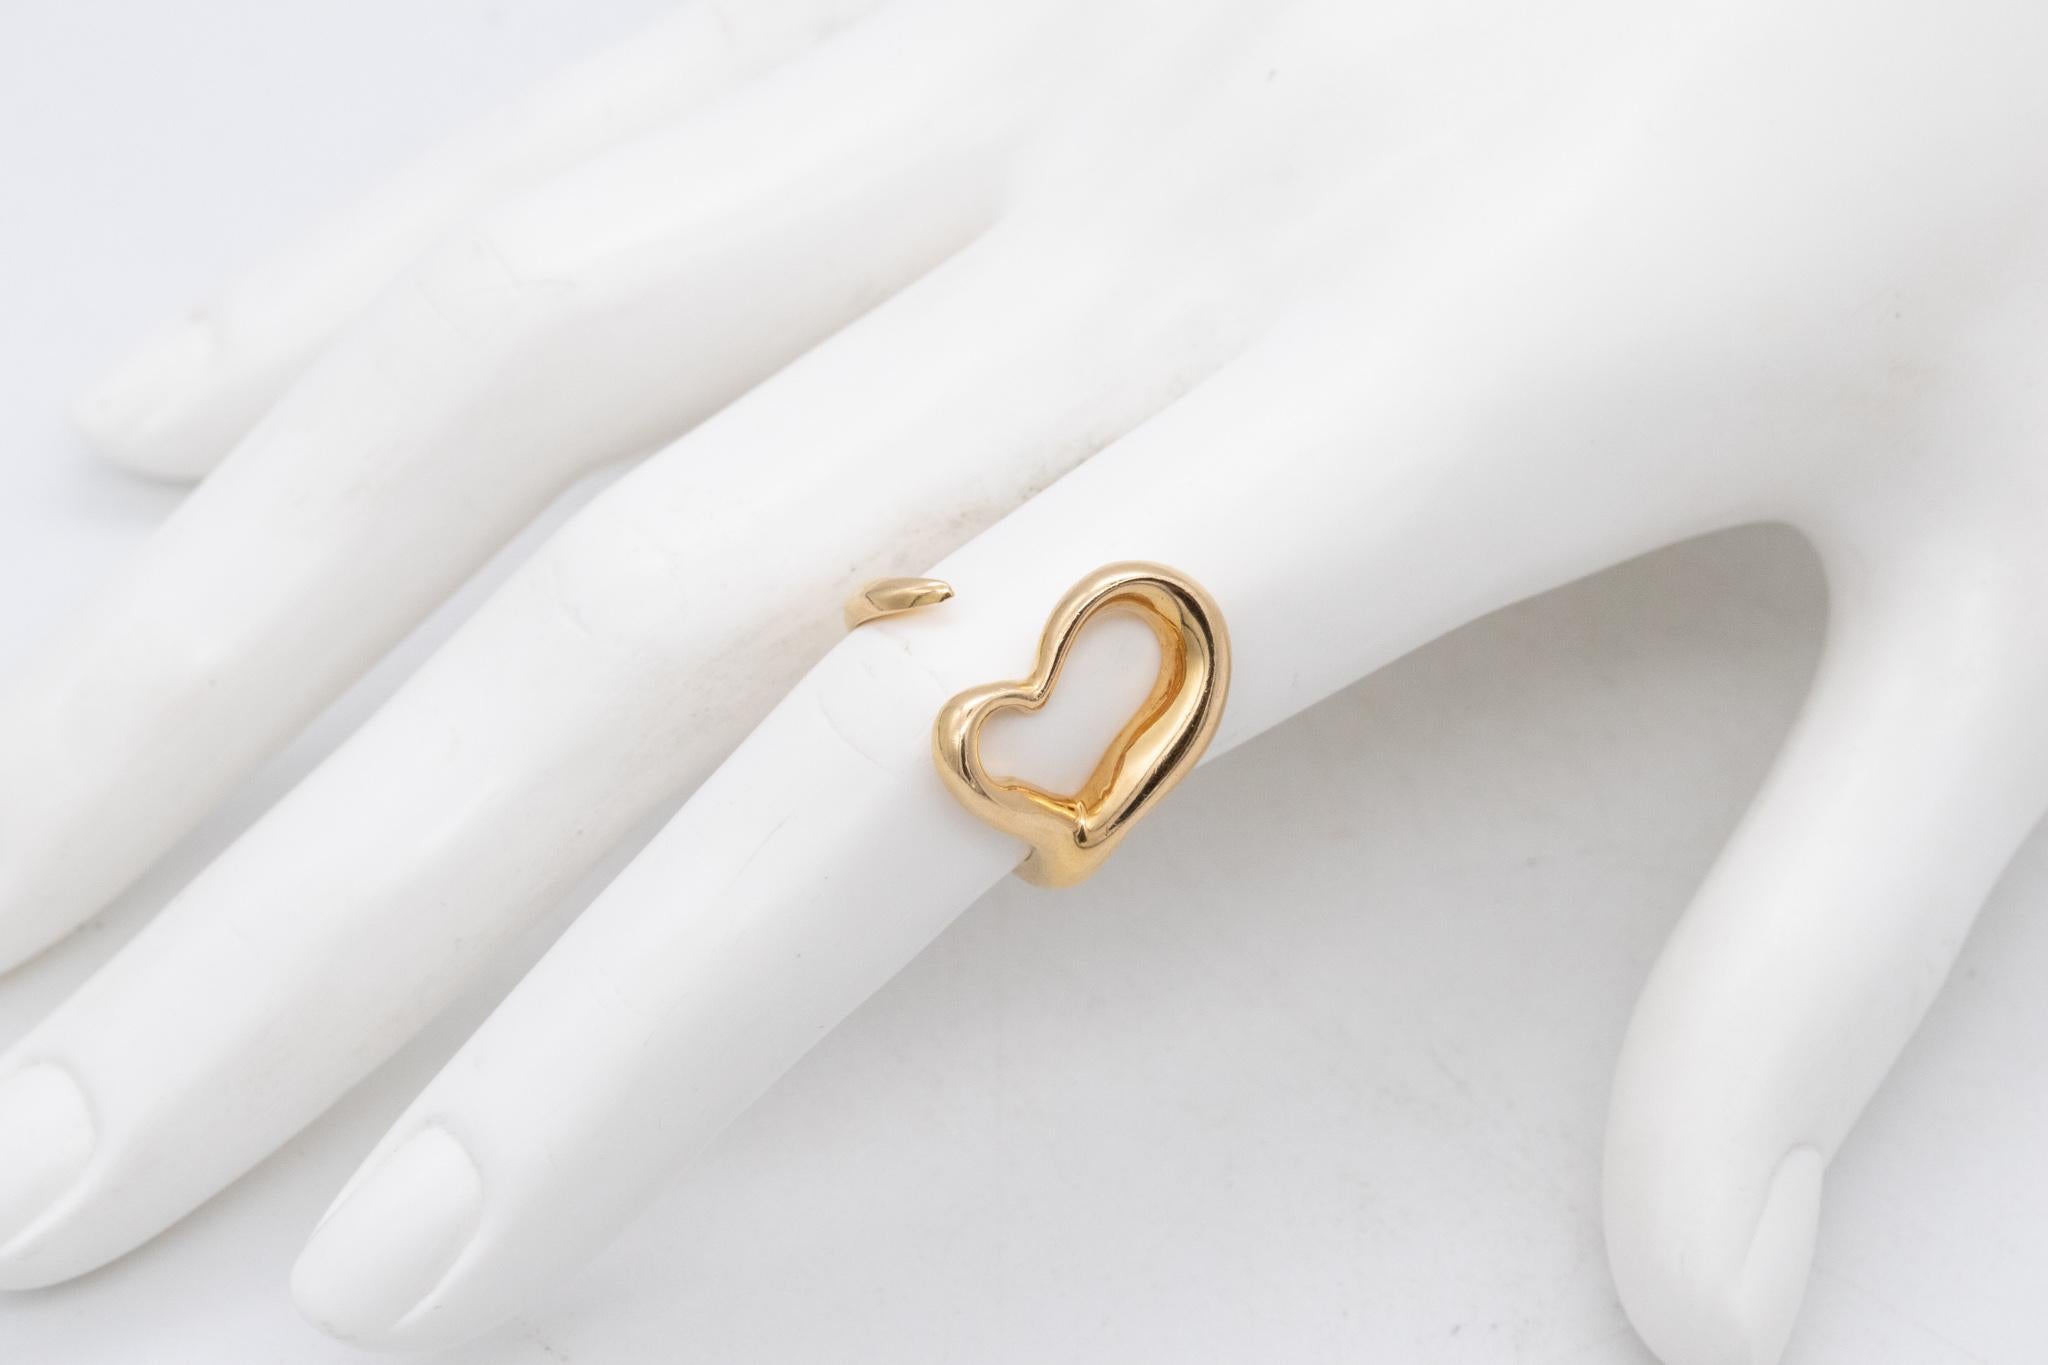 Heart shaped ring designed by Elsa Peretti (1940-2021) for Tiffany & Co.

An iconic and sculptural free form ring designed by Peretti, back in the 1980's. it was crafted in the shape of an open heart, in solid yellow gold of 18 karat, with high